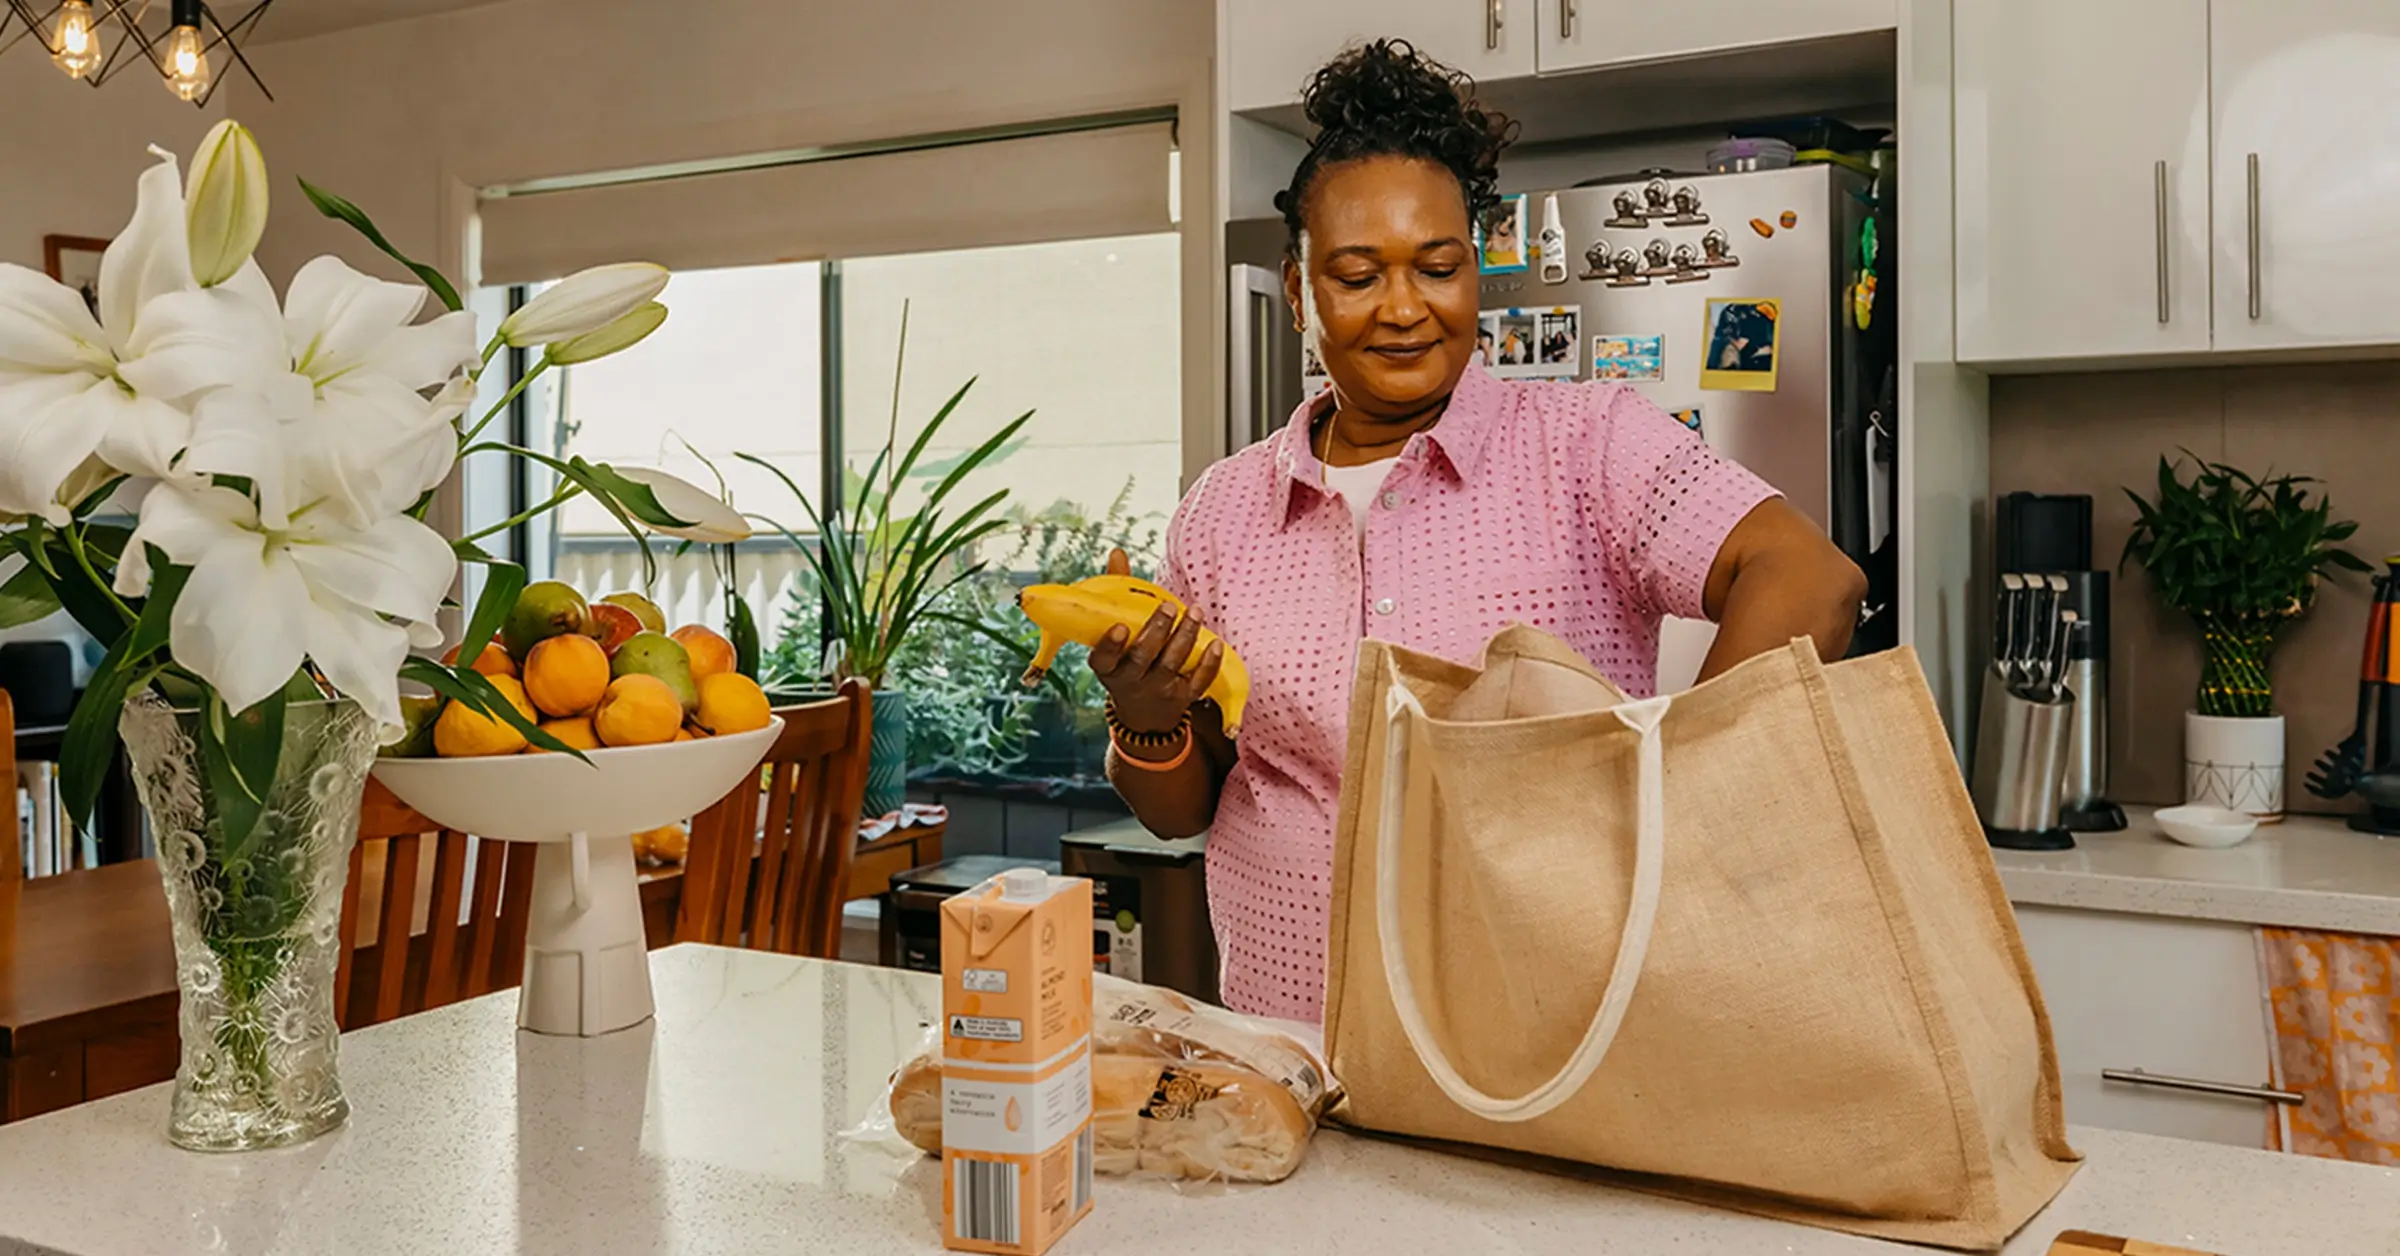 Support worker unpacks groceries from a jute shopping bag at their client’s kitchen bench.